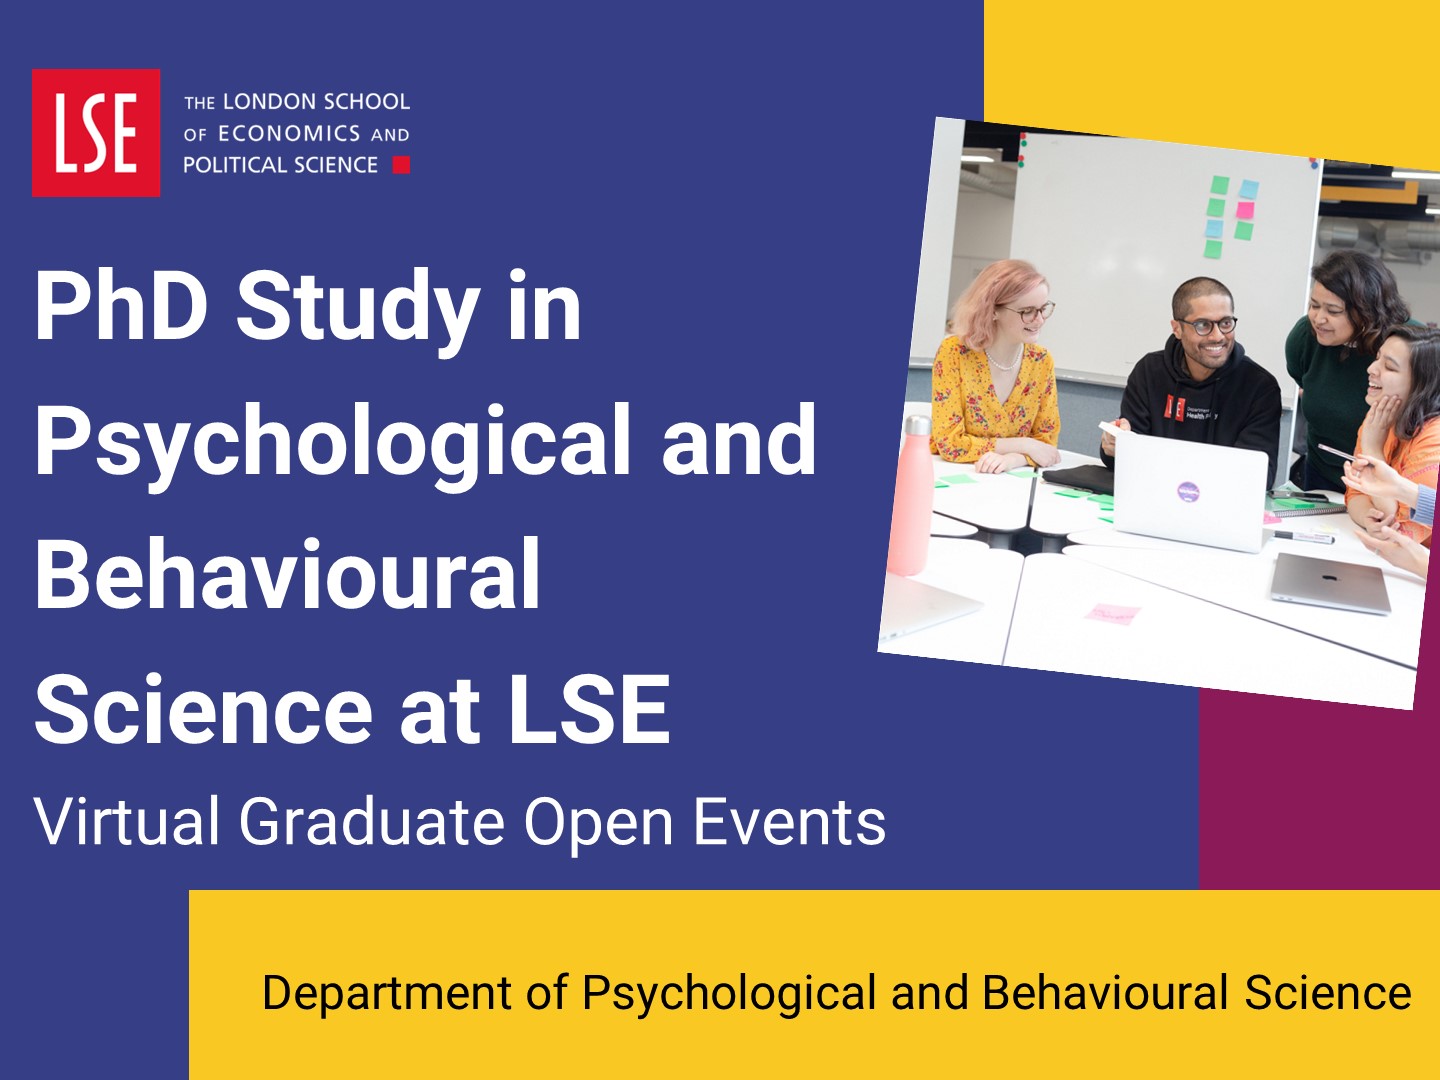 An introduction to PhD study in Psychological and Behavioural Science at LSE